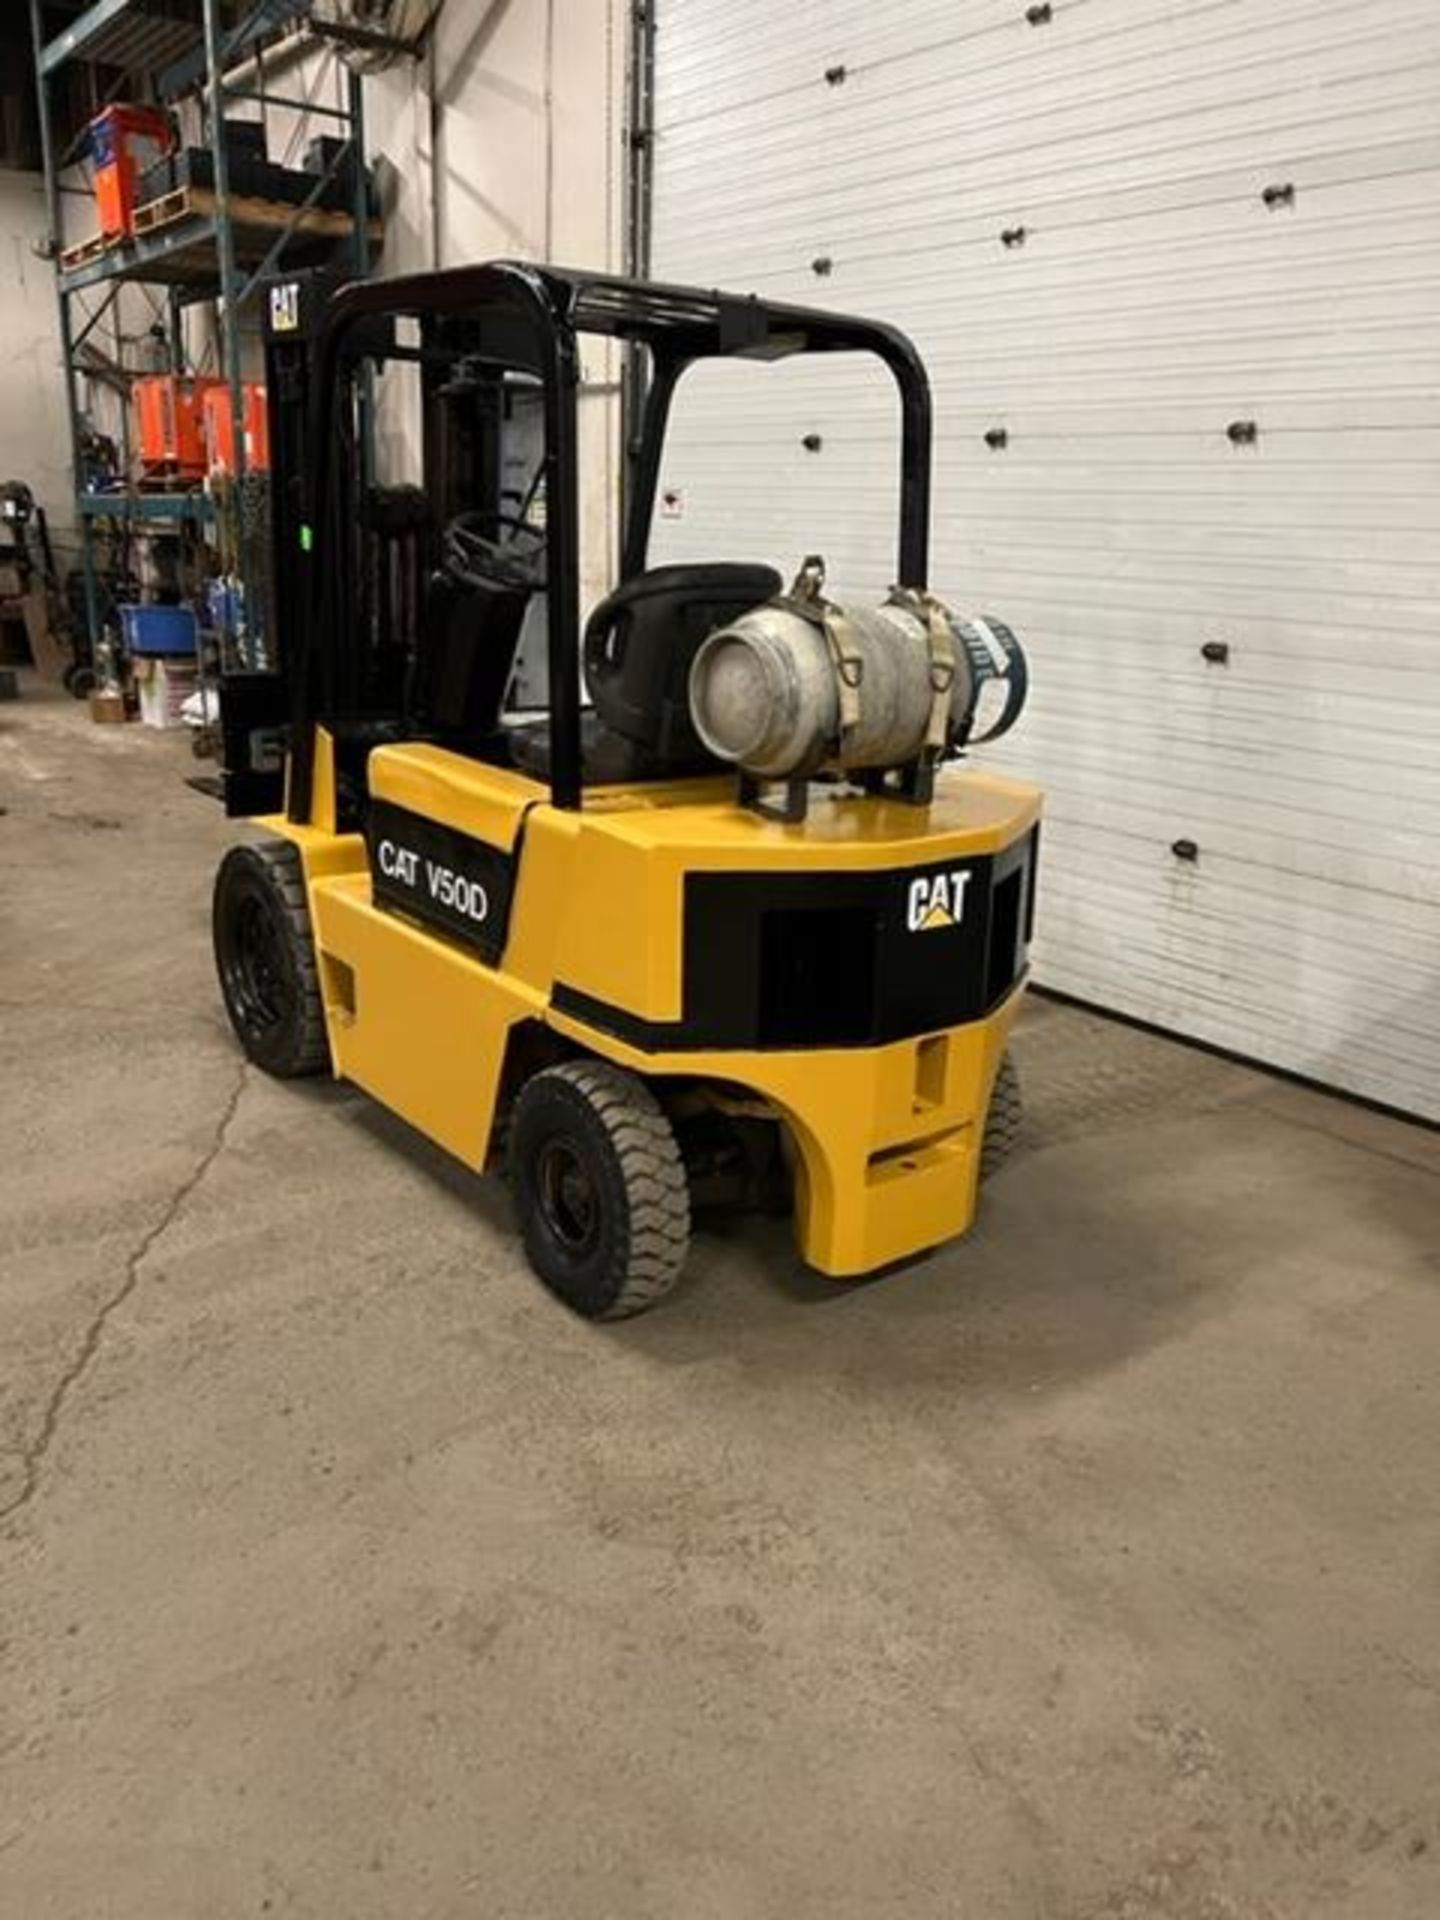 FREE CUSTOMS - CAT model 50 5,000lbs Capacity OUTDOOR Forklift LPG (propane) with SIDESHIFT - Image 3 of 3